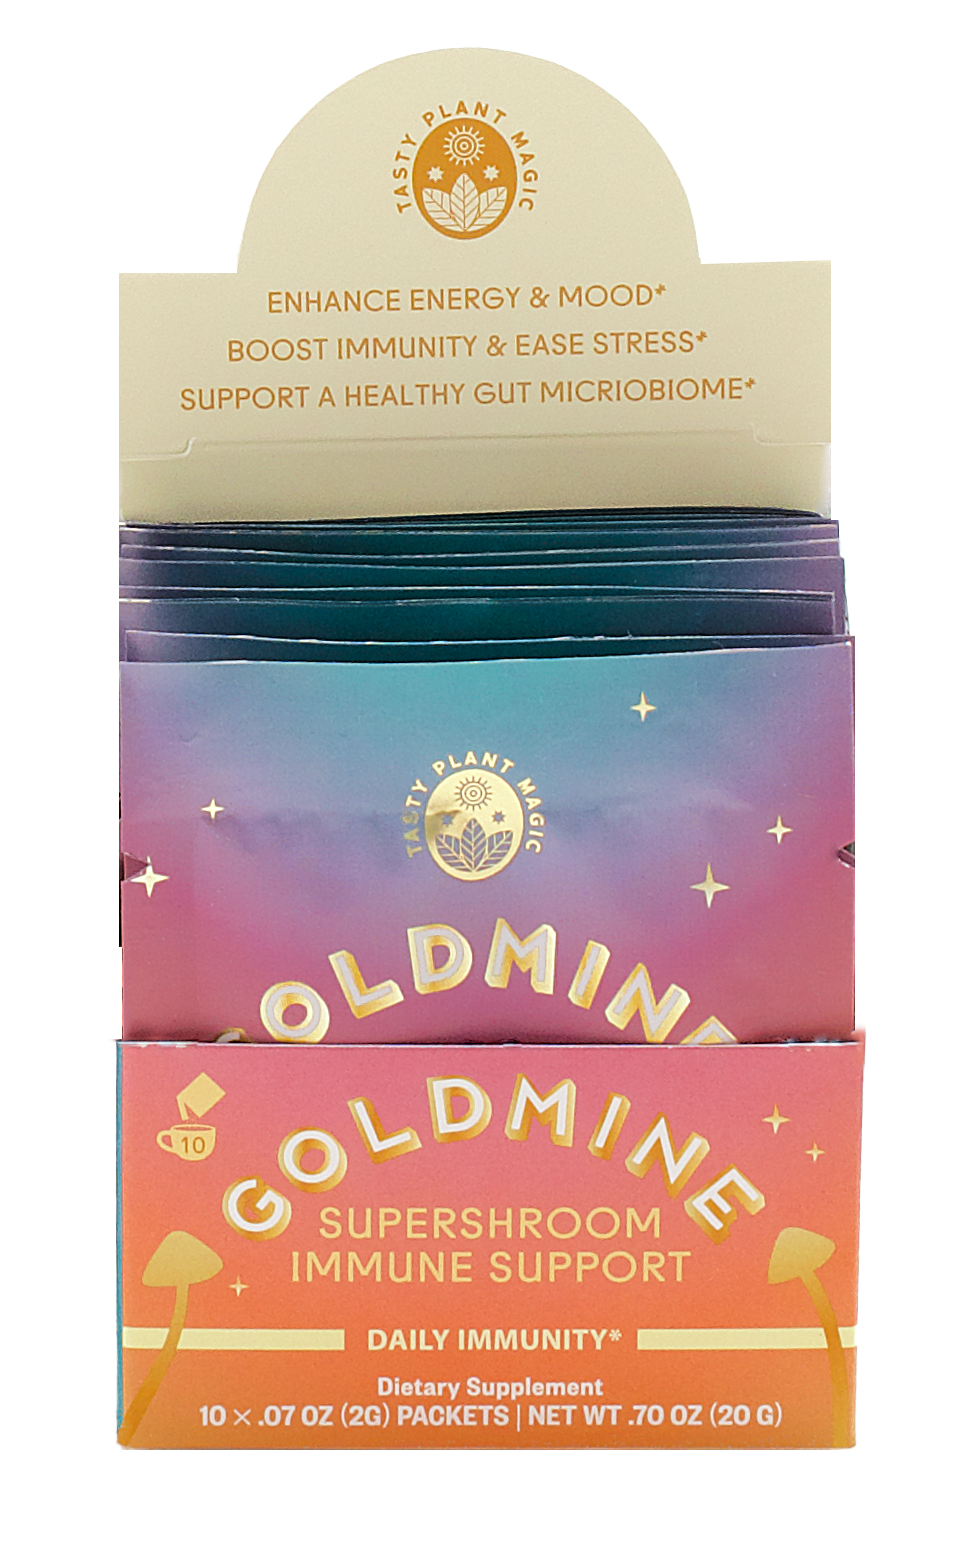 Supershroom Immunity Support Packets by Goldmine Adaptogens